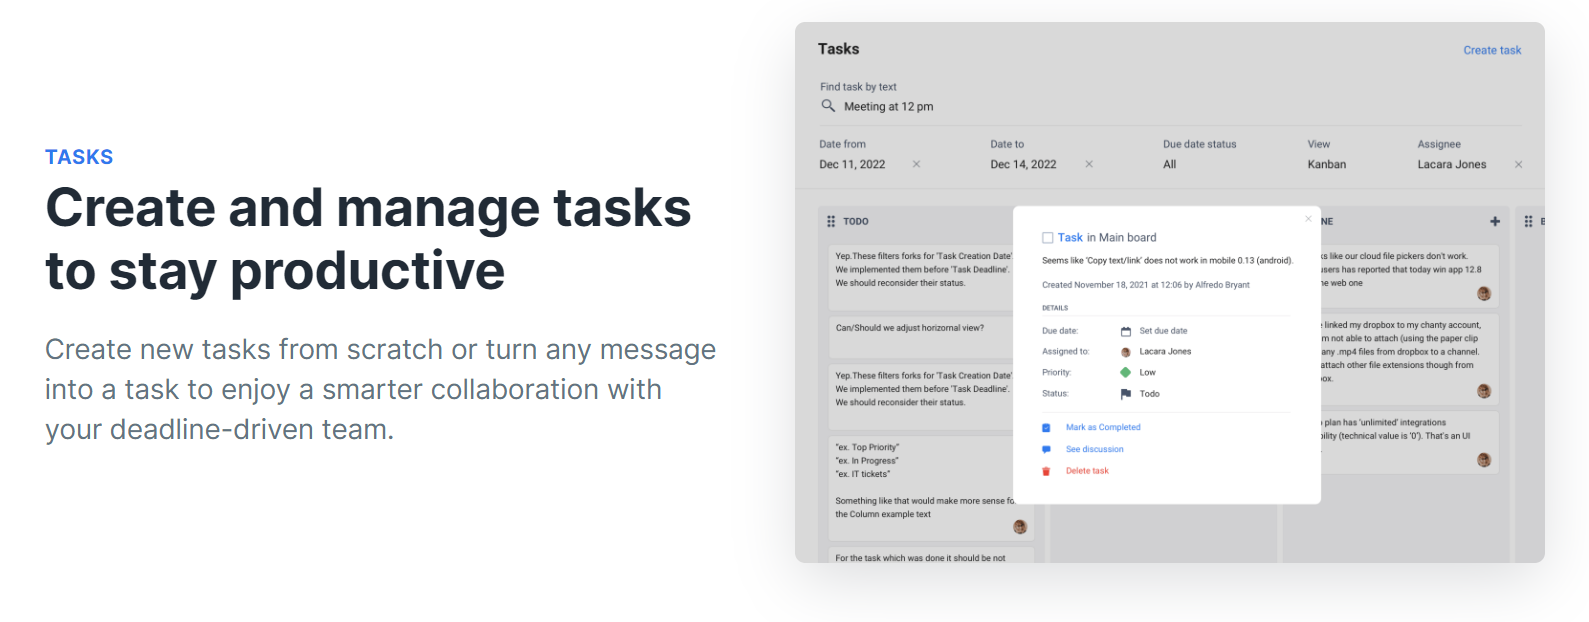 Chanty homepage, with tasks for managing teams